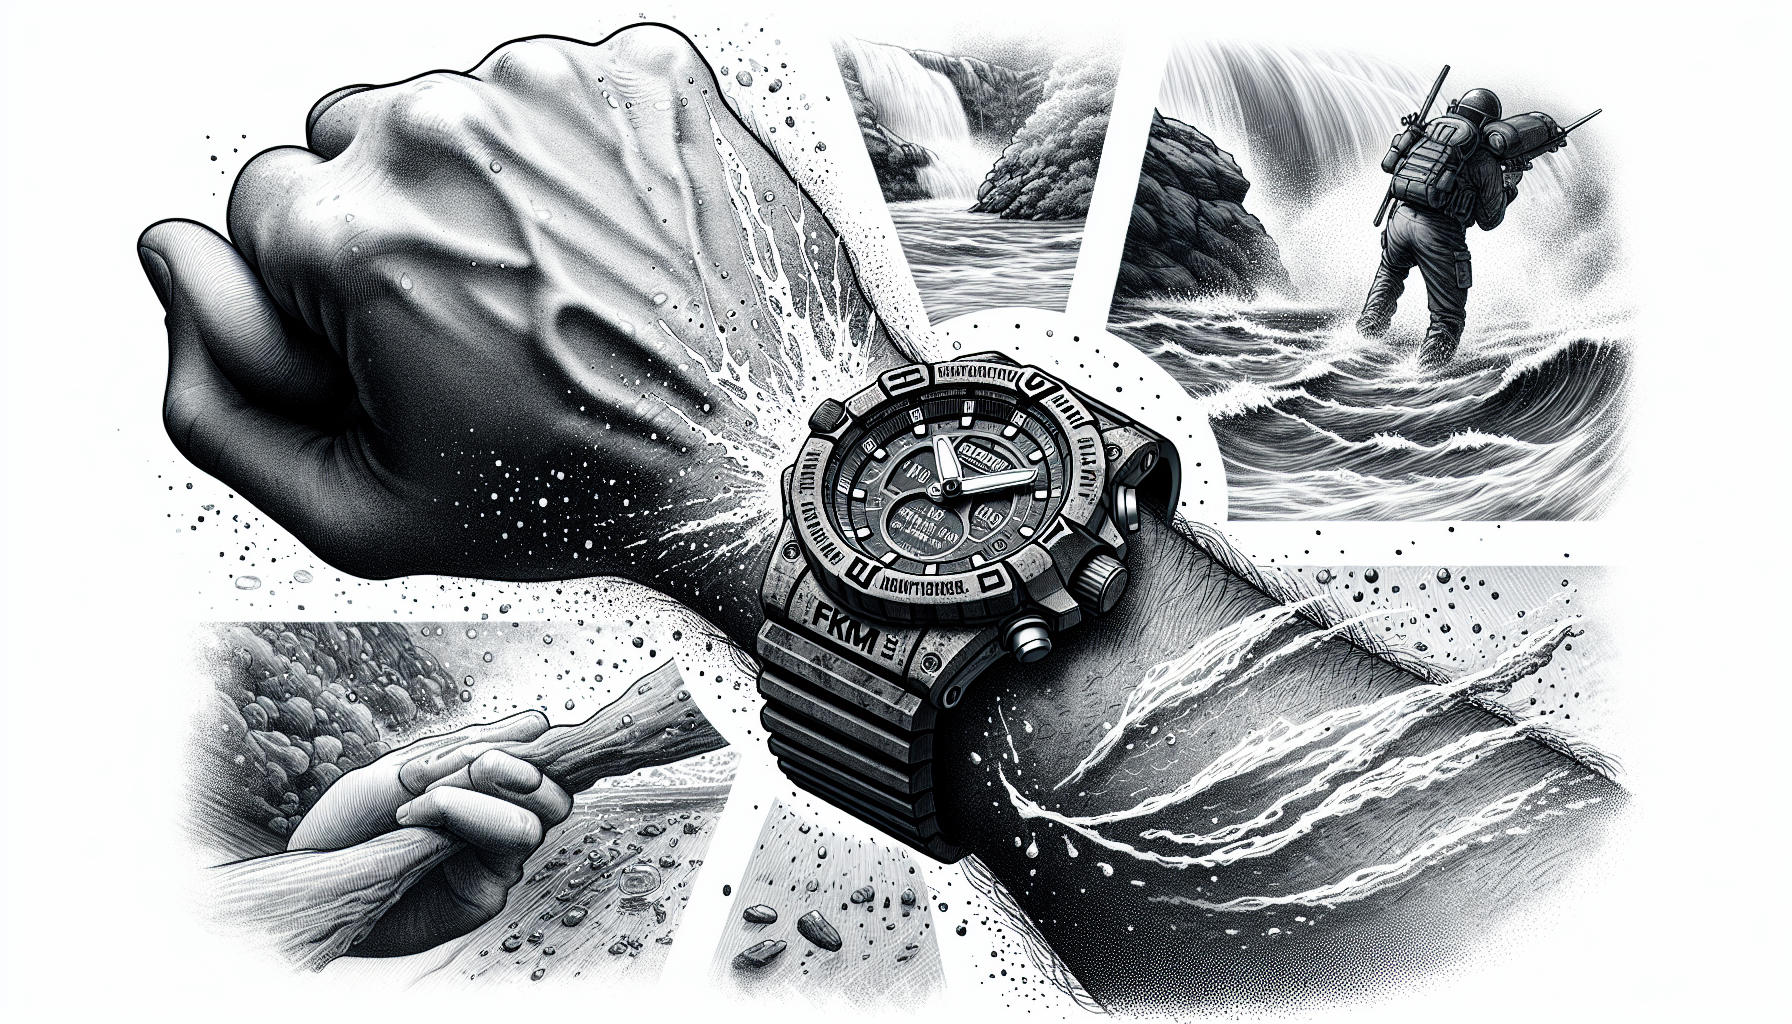 Illustration of durable FKM rubber watch strap in outdoor setting